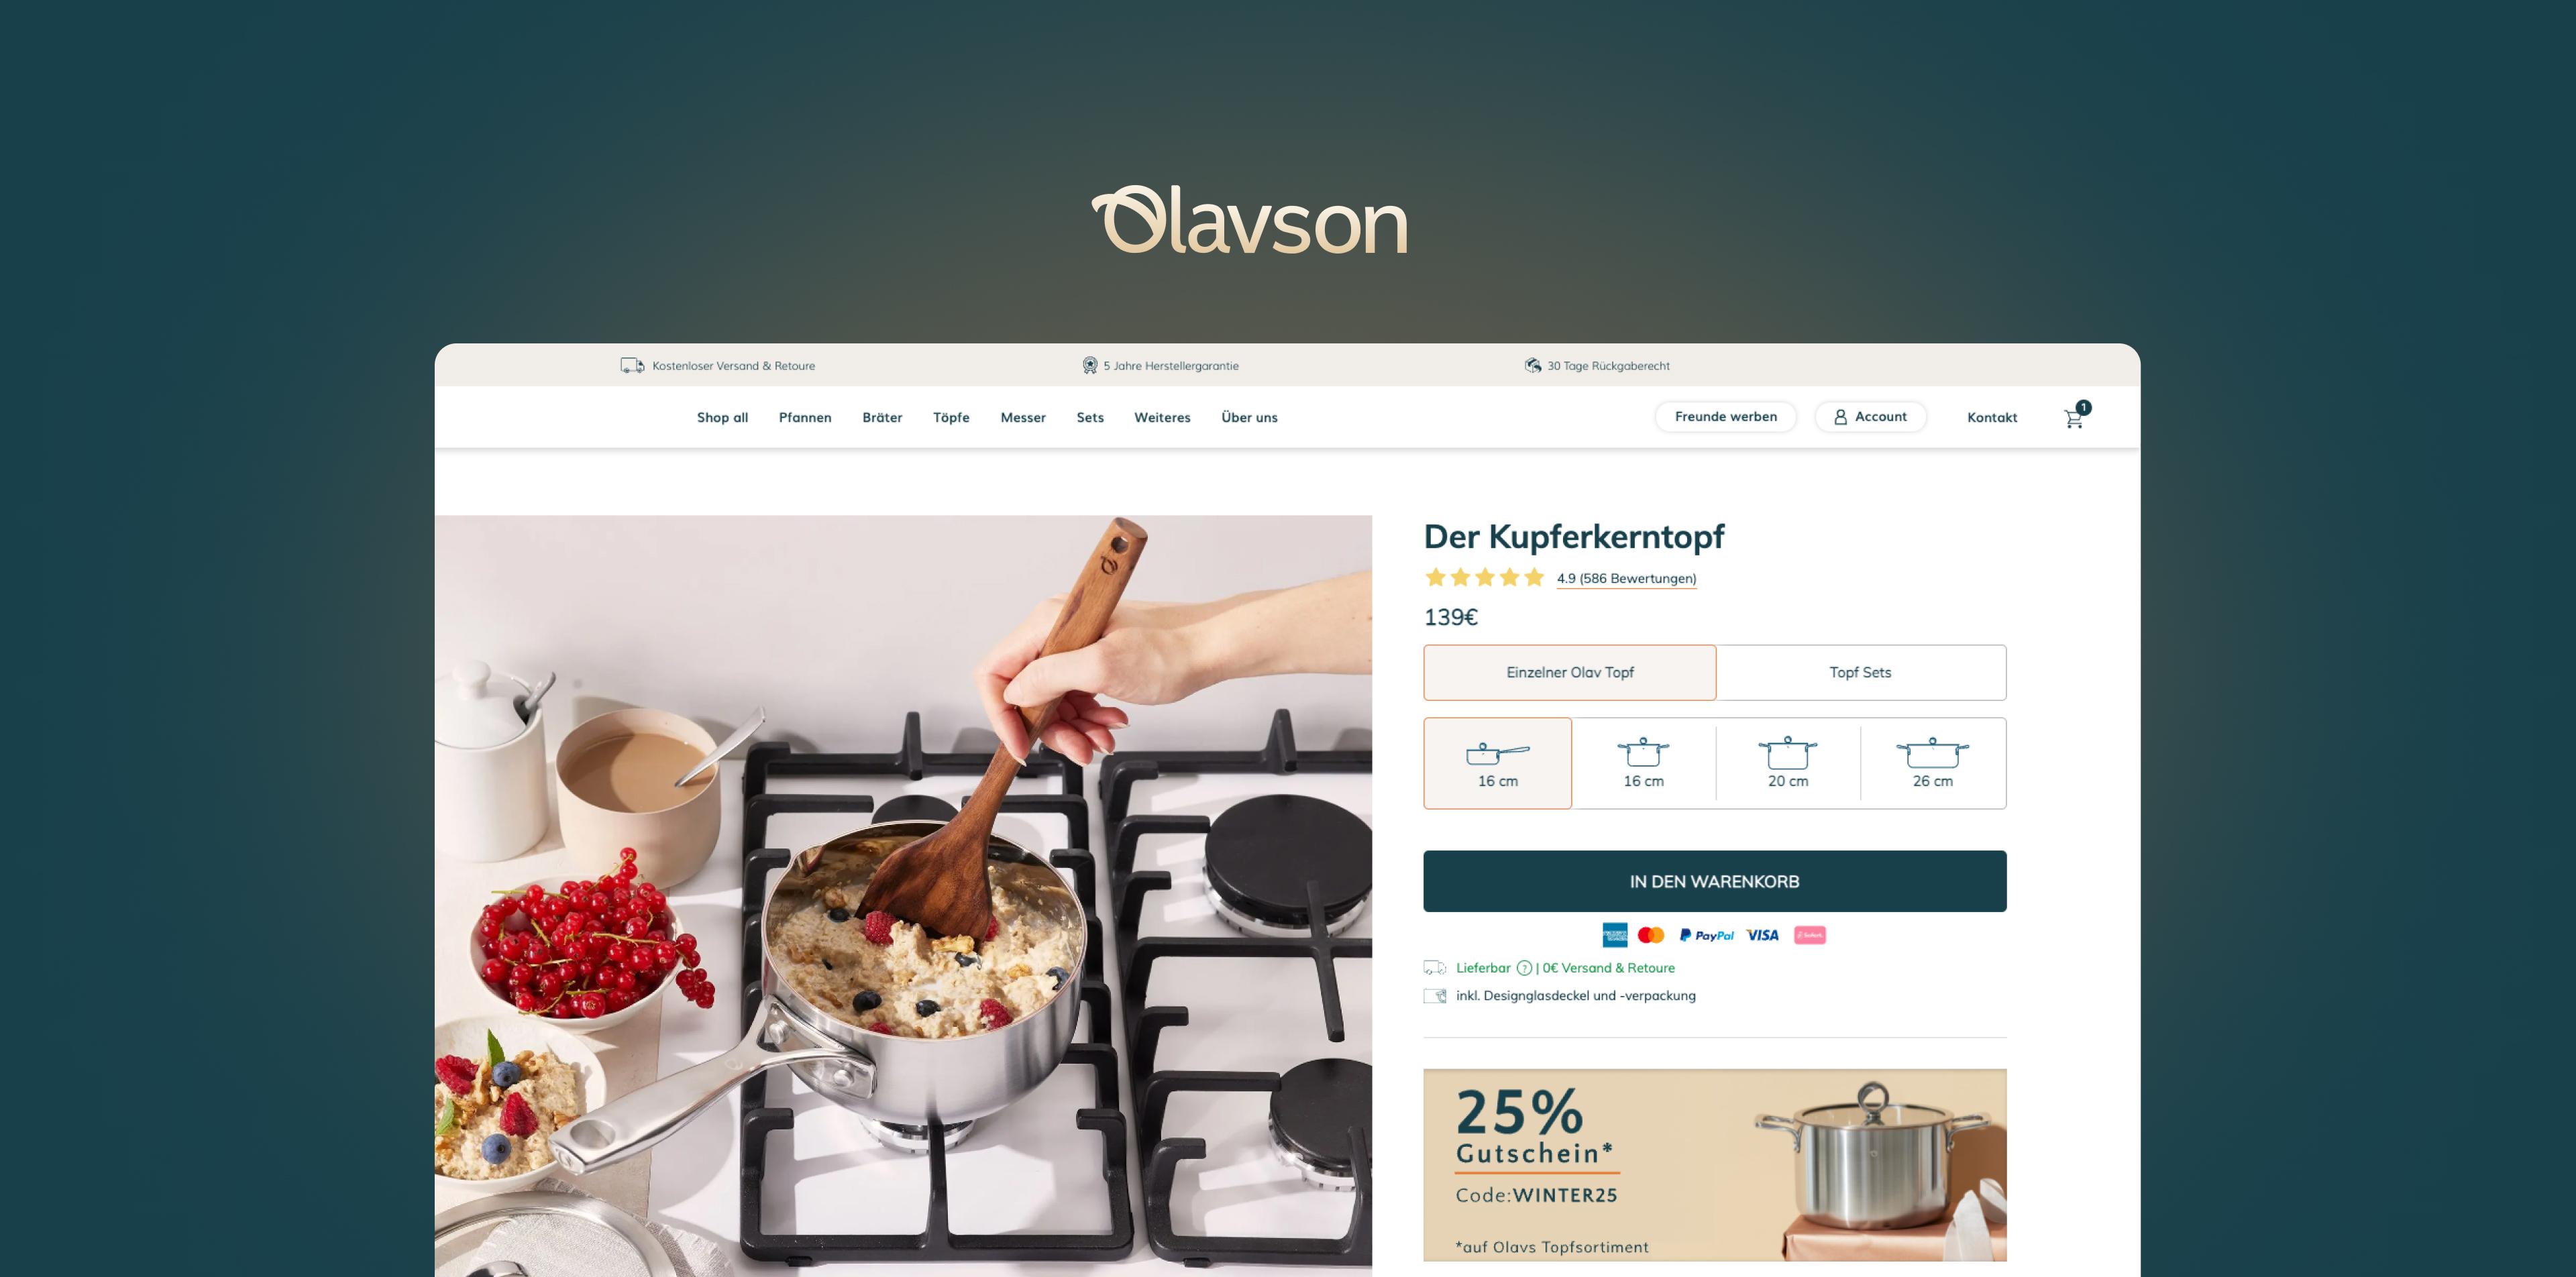 Building a future-proof ecommerce platform for Olavson